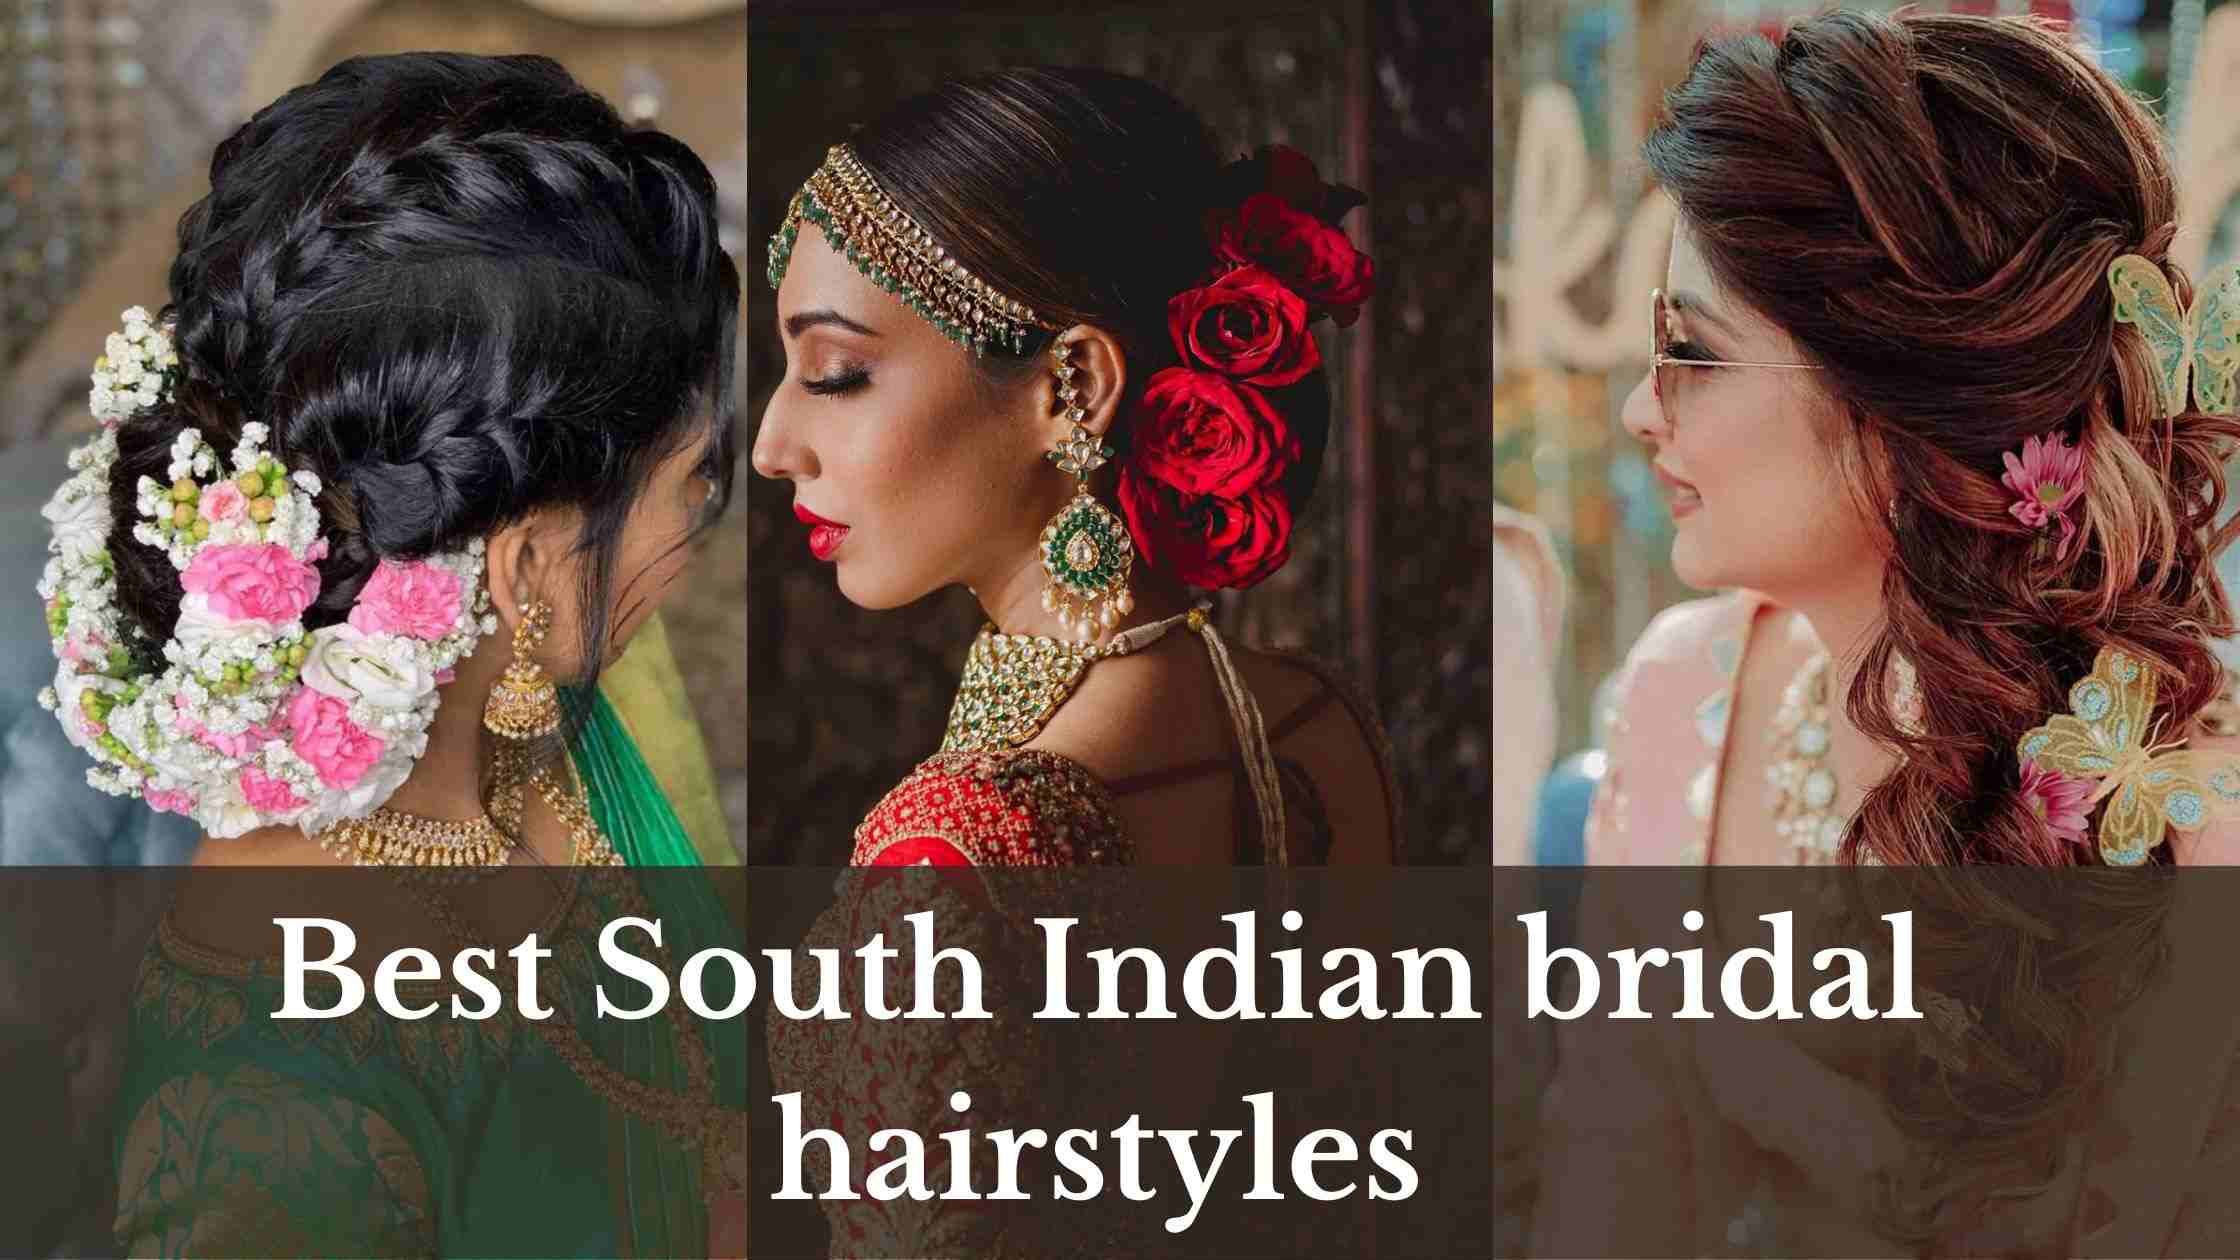 8 Chic And Easy Hairstyles To Try With the Indian Wear